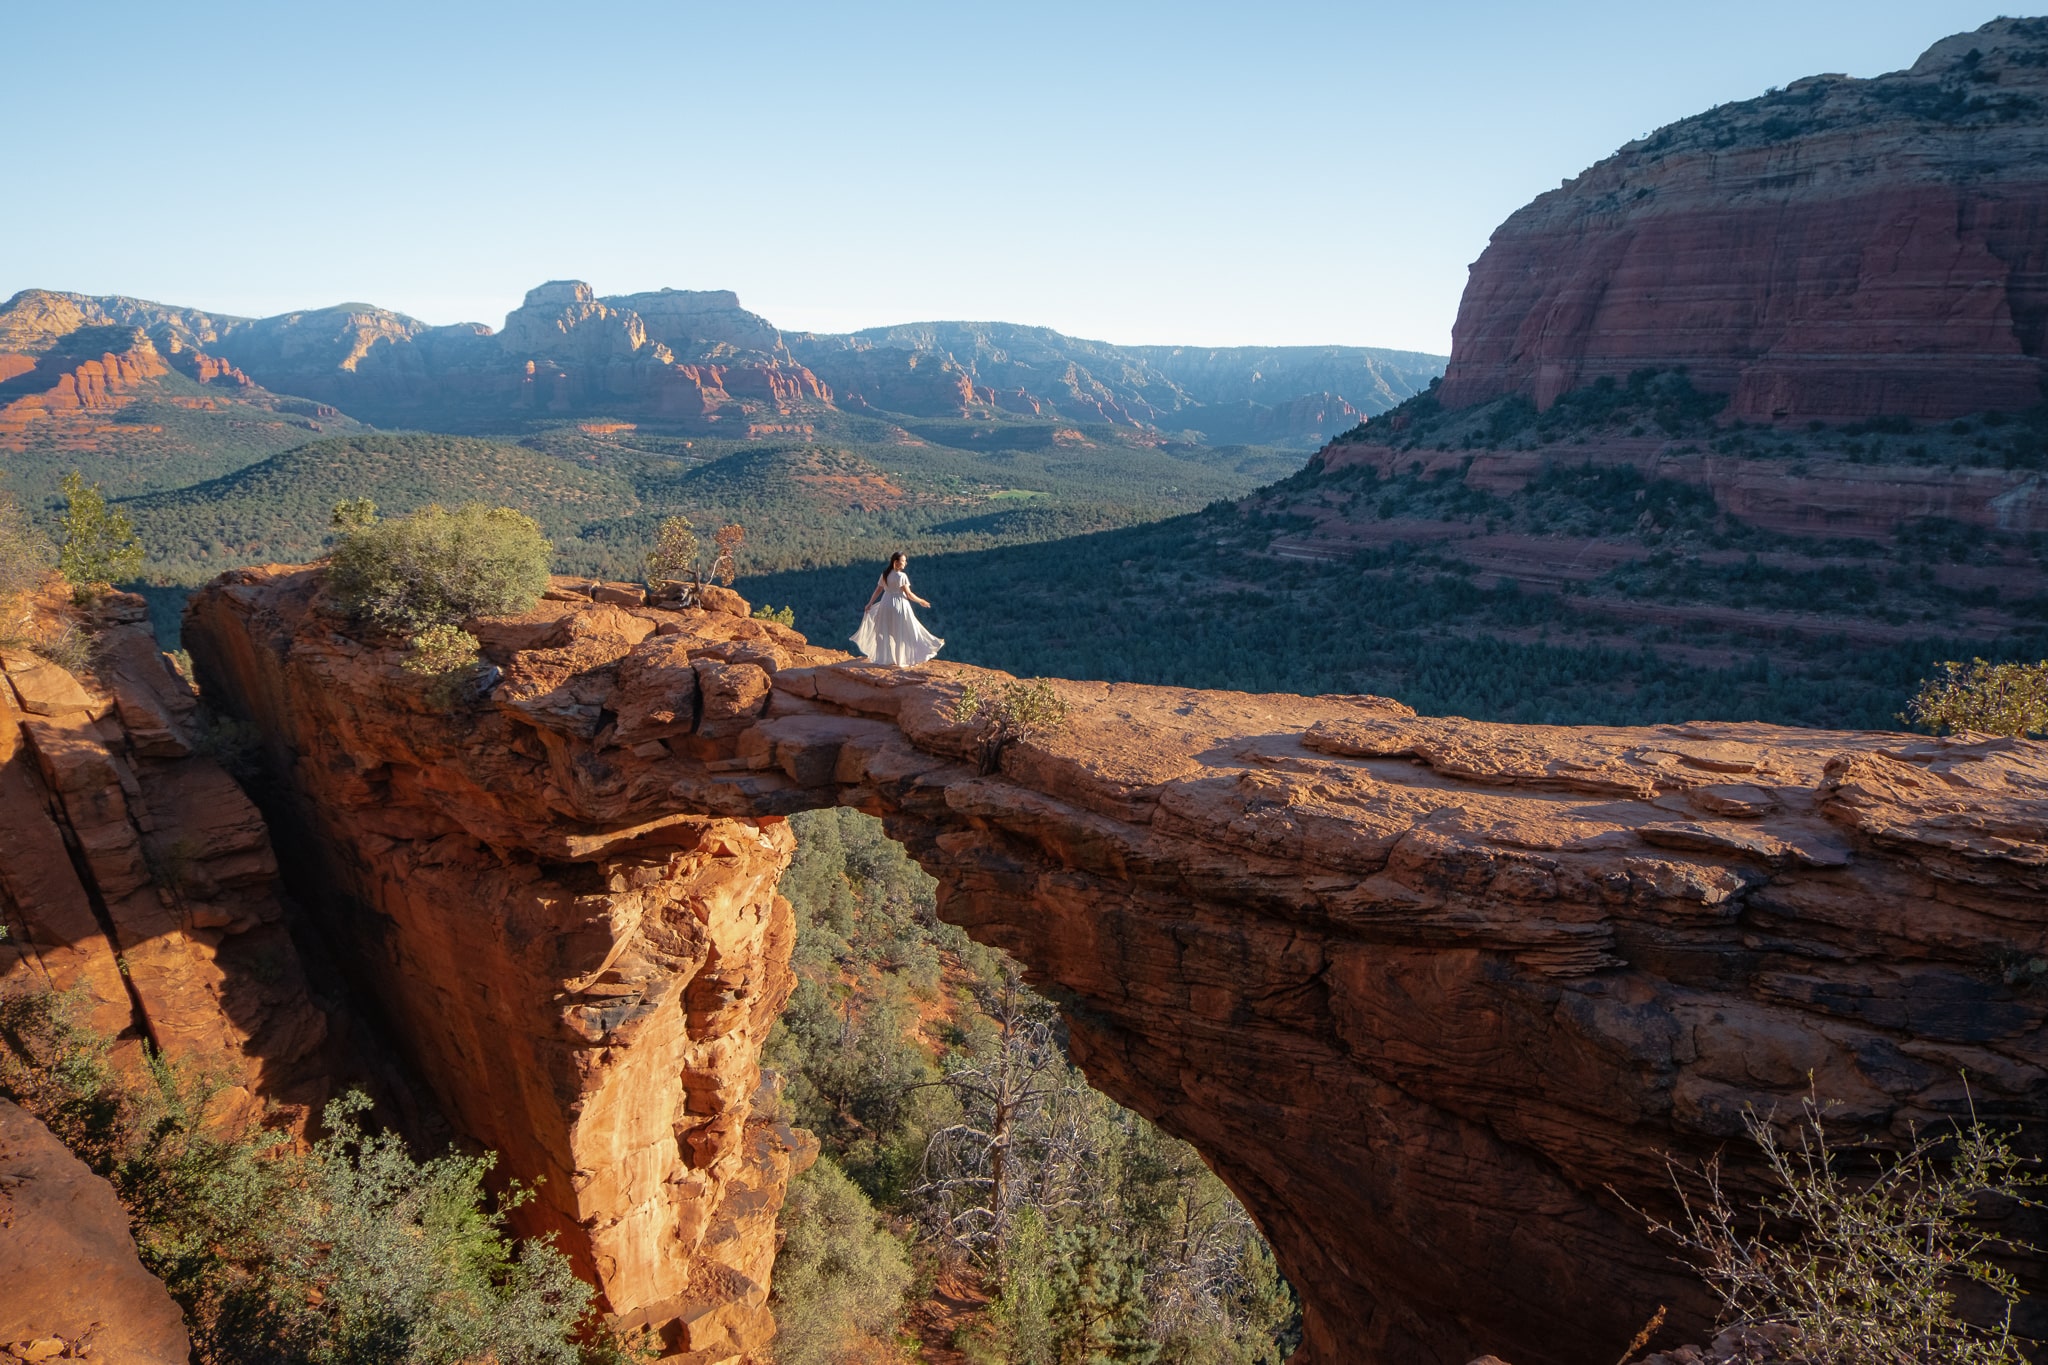 Hiking Devils Bridge for sunrise on the last day of your Sedona Road Trip